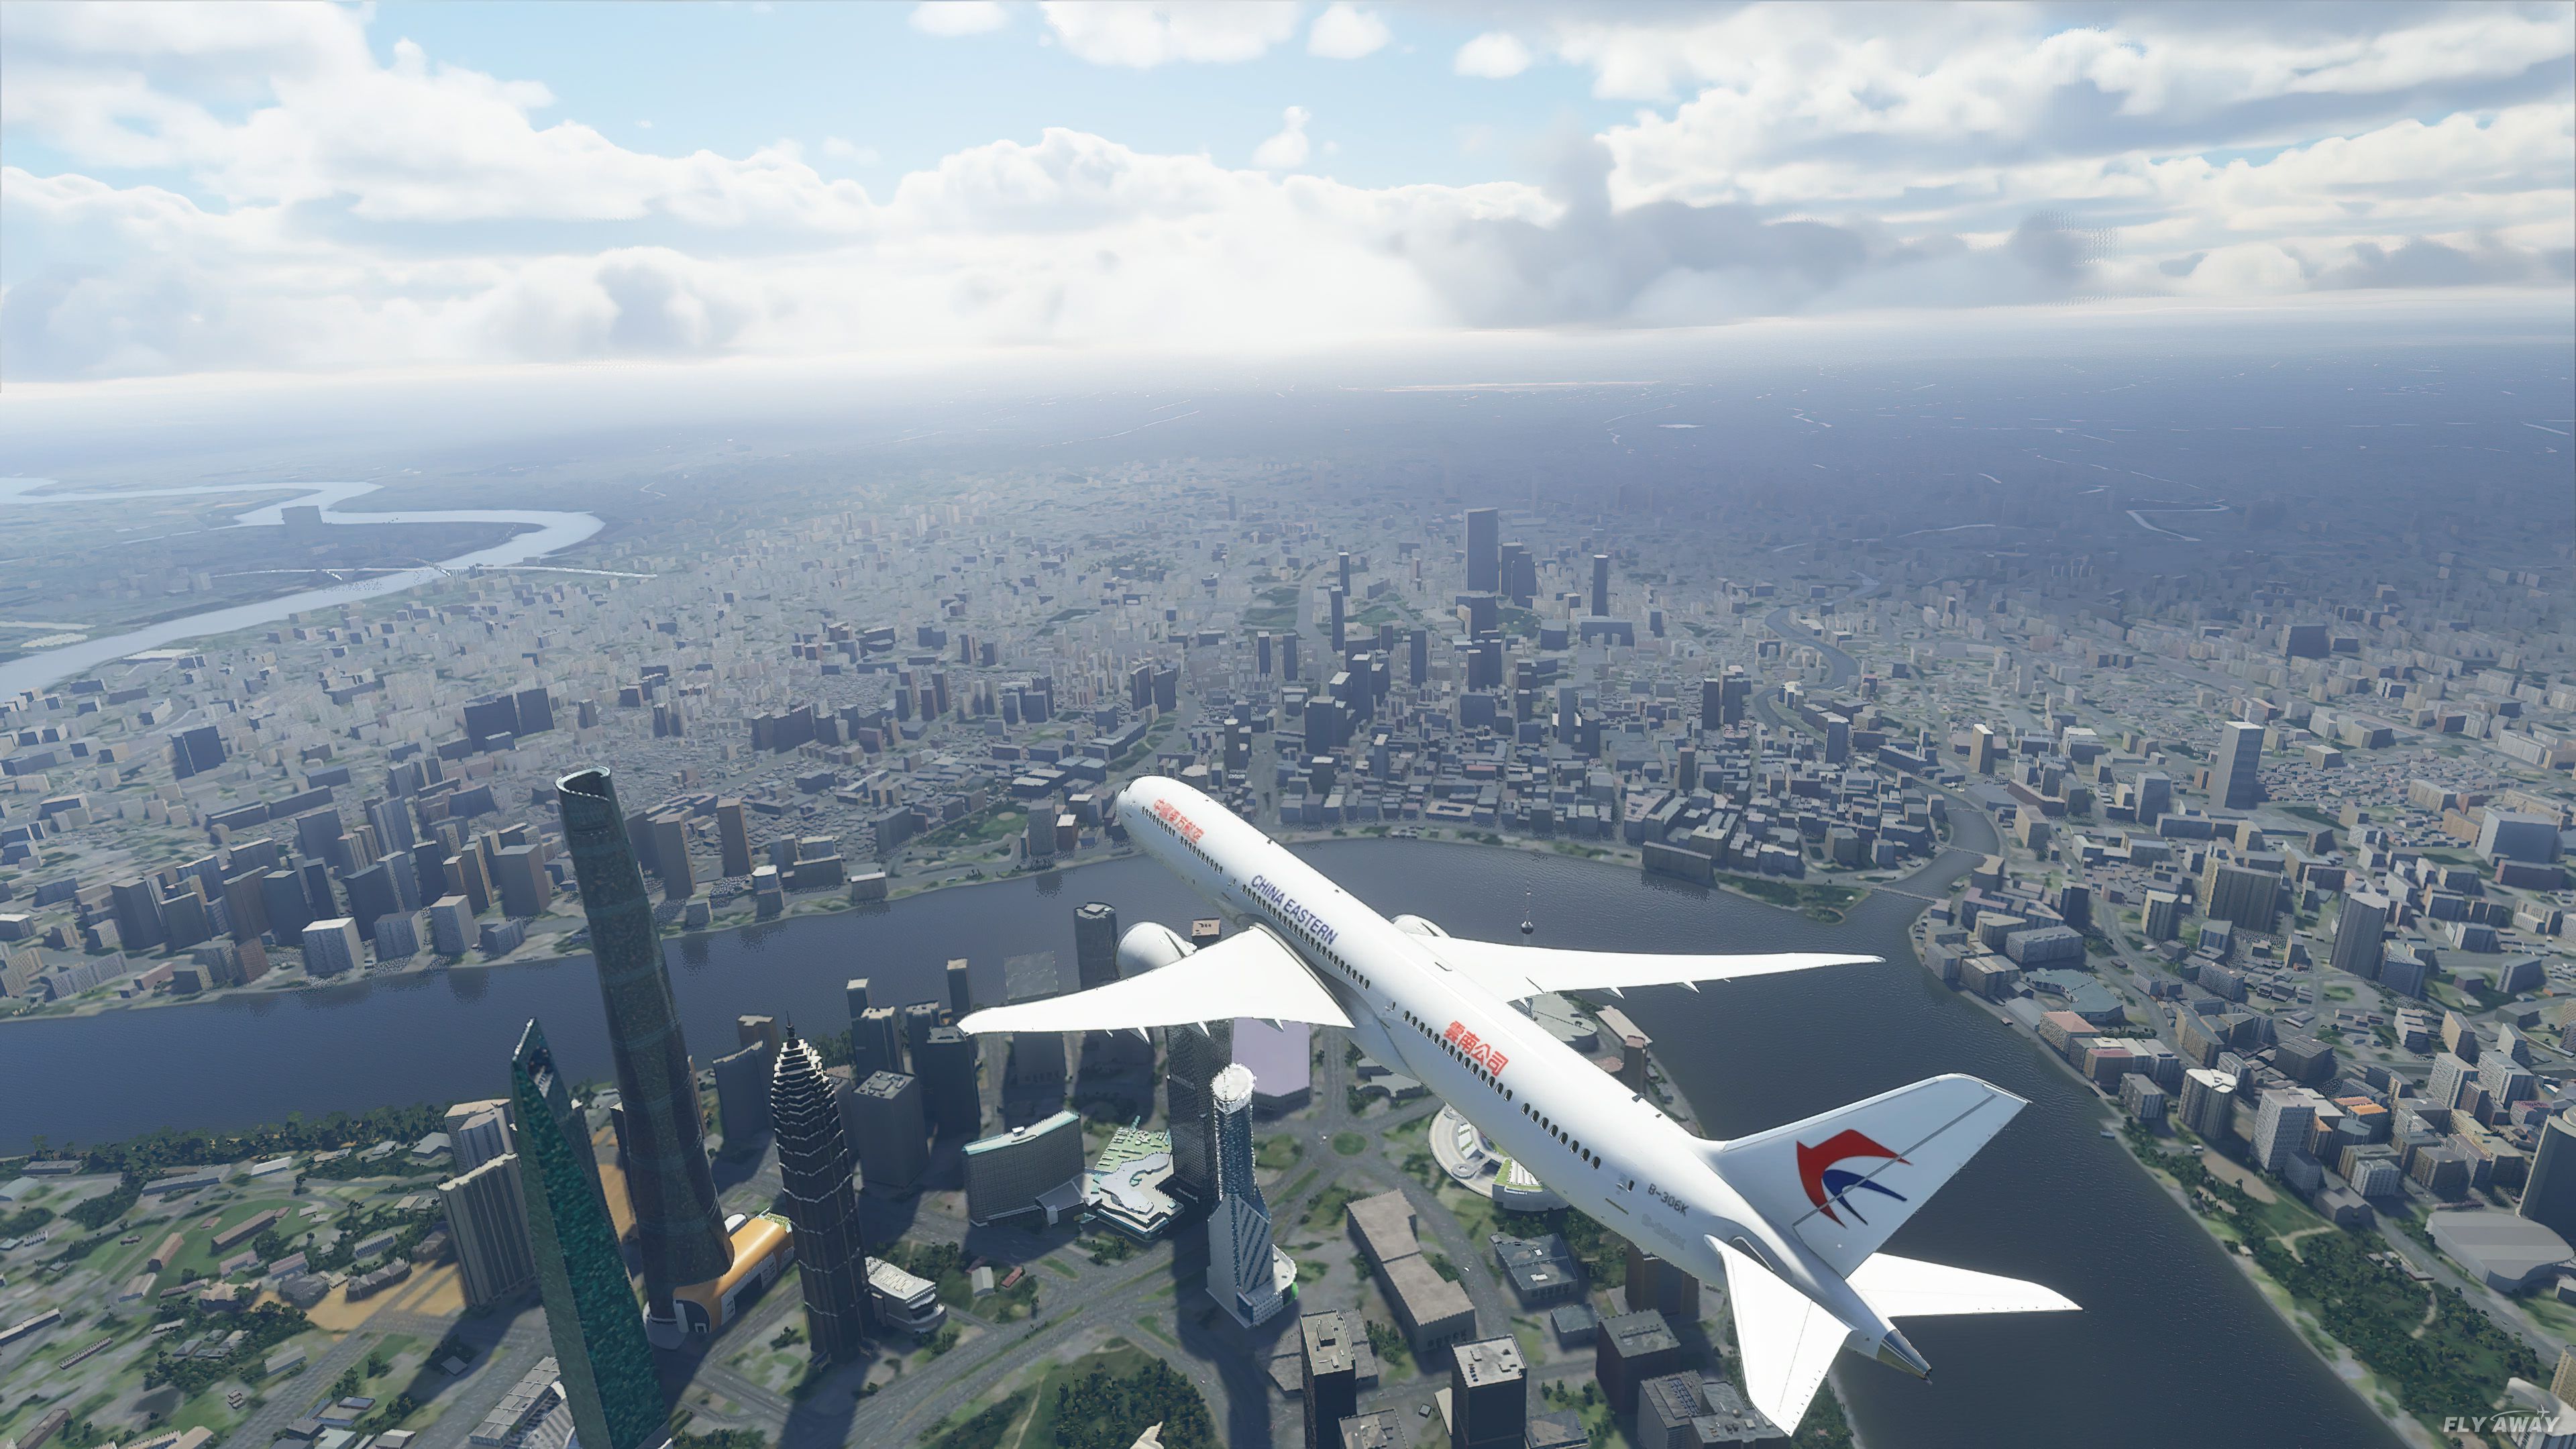 Microsoft Flight Simulator lets you fly through China, where the